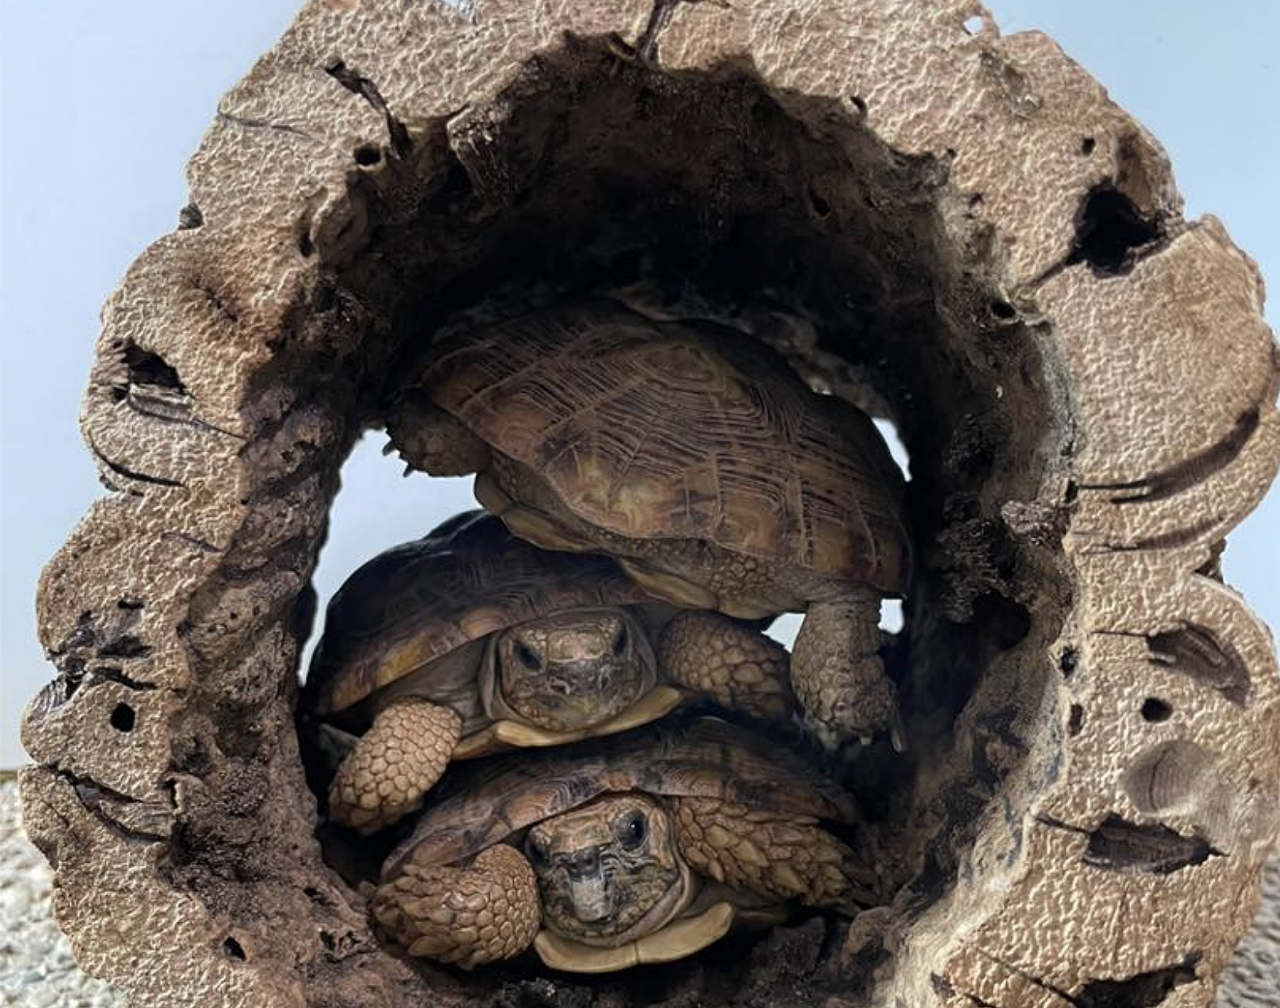 These pancake tortoises are making a short stack, minus the syrup.